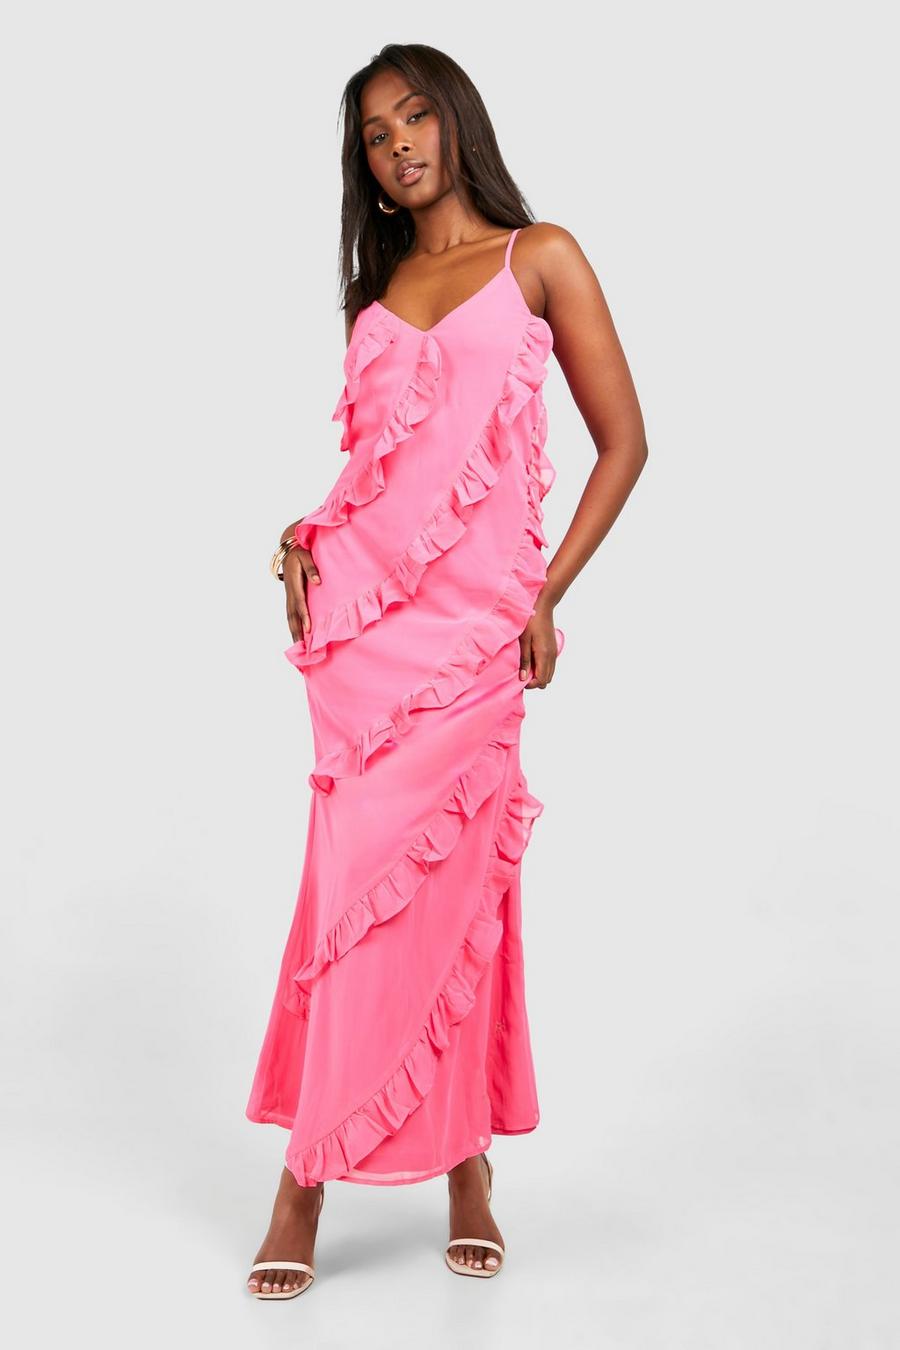 Hot pink Ditsy Floral Strappy Milkmaid Midaxi Dress